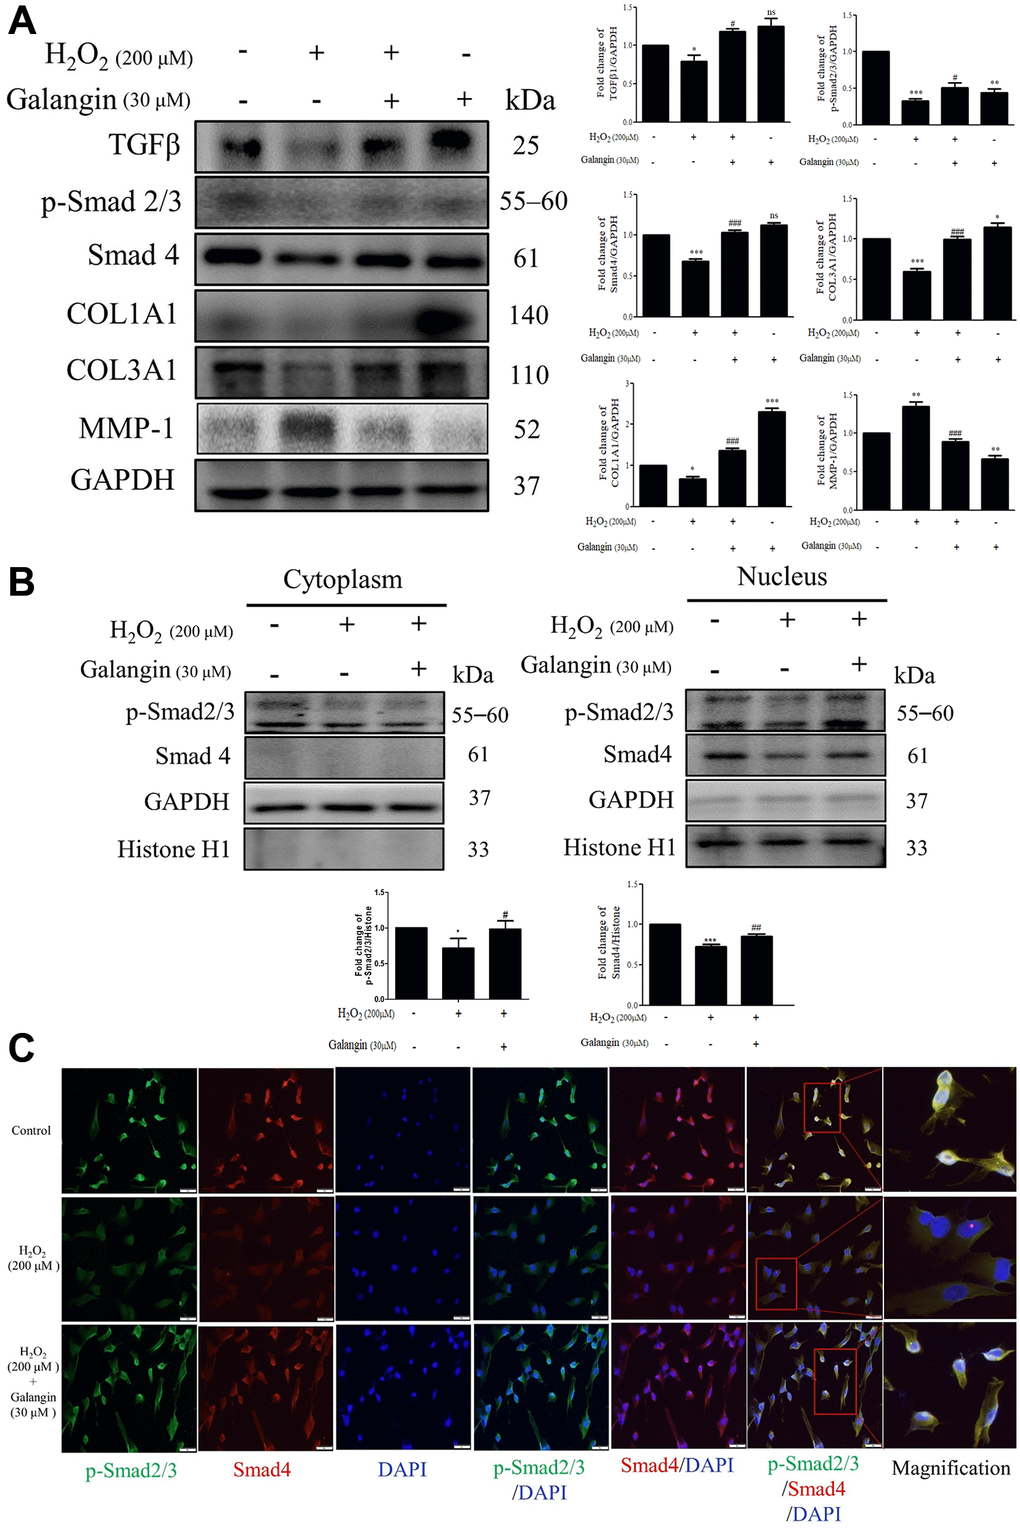 Galangin attenuates H2O2-induced TGFβ/Smad collagen synthesis pathway impairment in HS68 cells. (A) HS68 cells were exposed to H2O2 (200 μM) for 1 h and then treated with galangin (30 μM) for 23 h. Protein expression of collagen synthesis-related pathway components (TGFβ, p-smad2/3, Smad4, COL1A1, COL3A1) and collagen degradation-related protein (MMP-1) were detected by western blot. (B) The protein expression of p-smad2/3, Smad4 in the nuclear and cytosolic fractions was detected by western blotting. GAPDH was used as a loading control. Values are shown as mean ± SE. Quantification of the results is shown (n = 3) *P **P ***P #P ##P ###P 2O2-treated cells. (C) Anti-p-Smad2/3, Smad4 antibody, and FITC/PE-conjugated secondary antibody were used to detect p-Smad2/3 (green), Smad4 (red) expression. DAPI indicated the nucleus location (blue). The images were captured using a florescence microscope (200×).